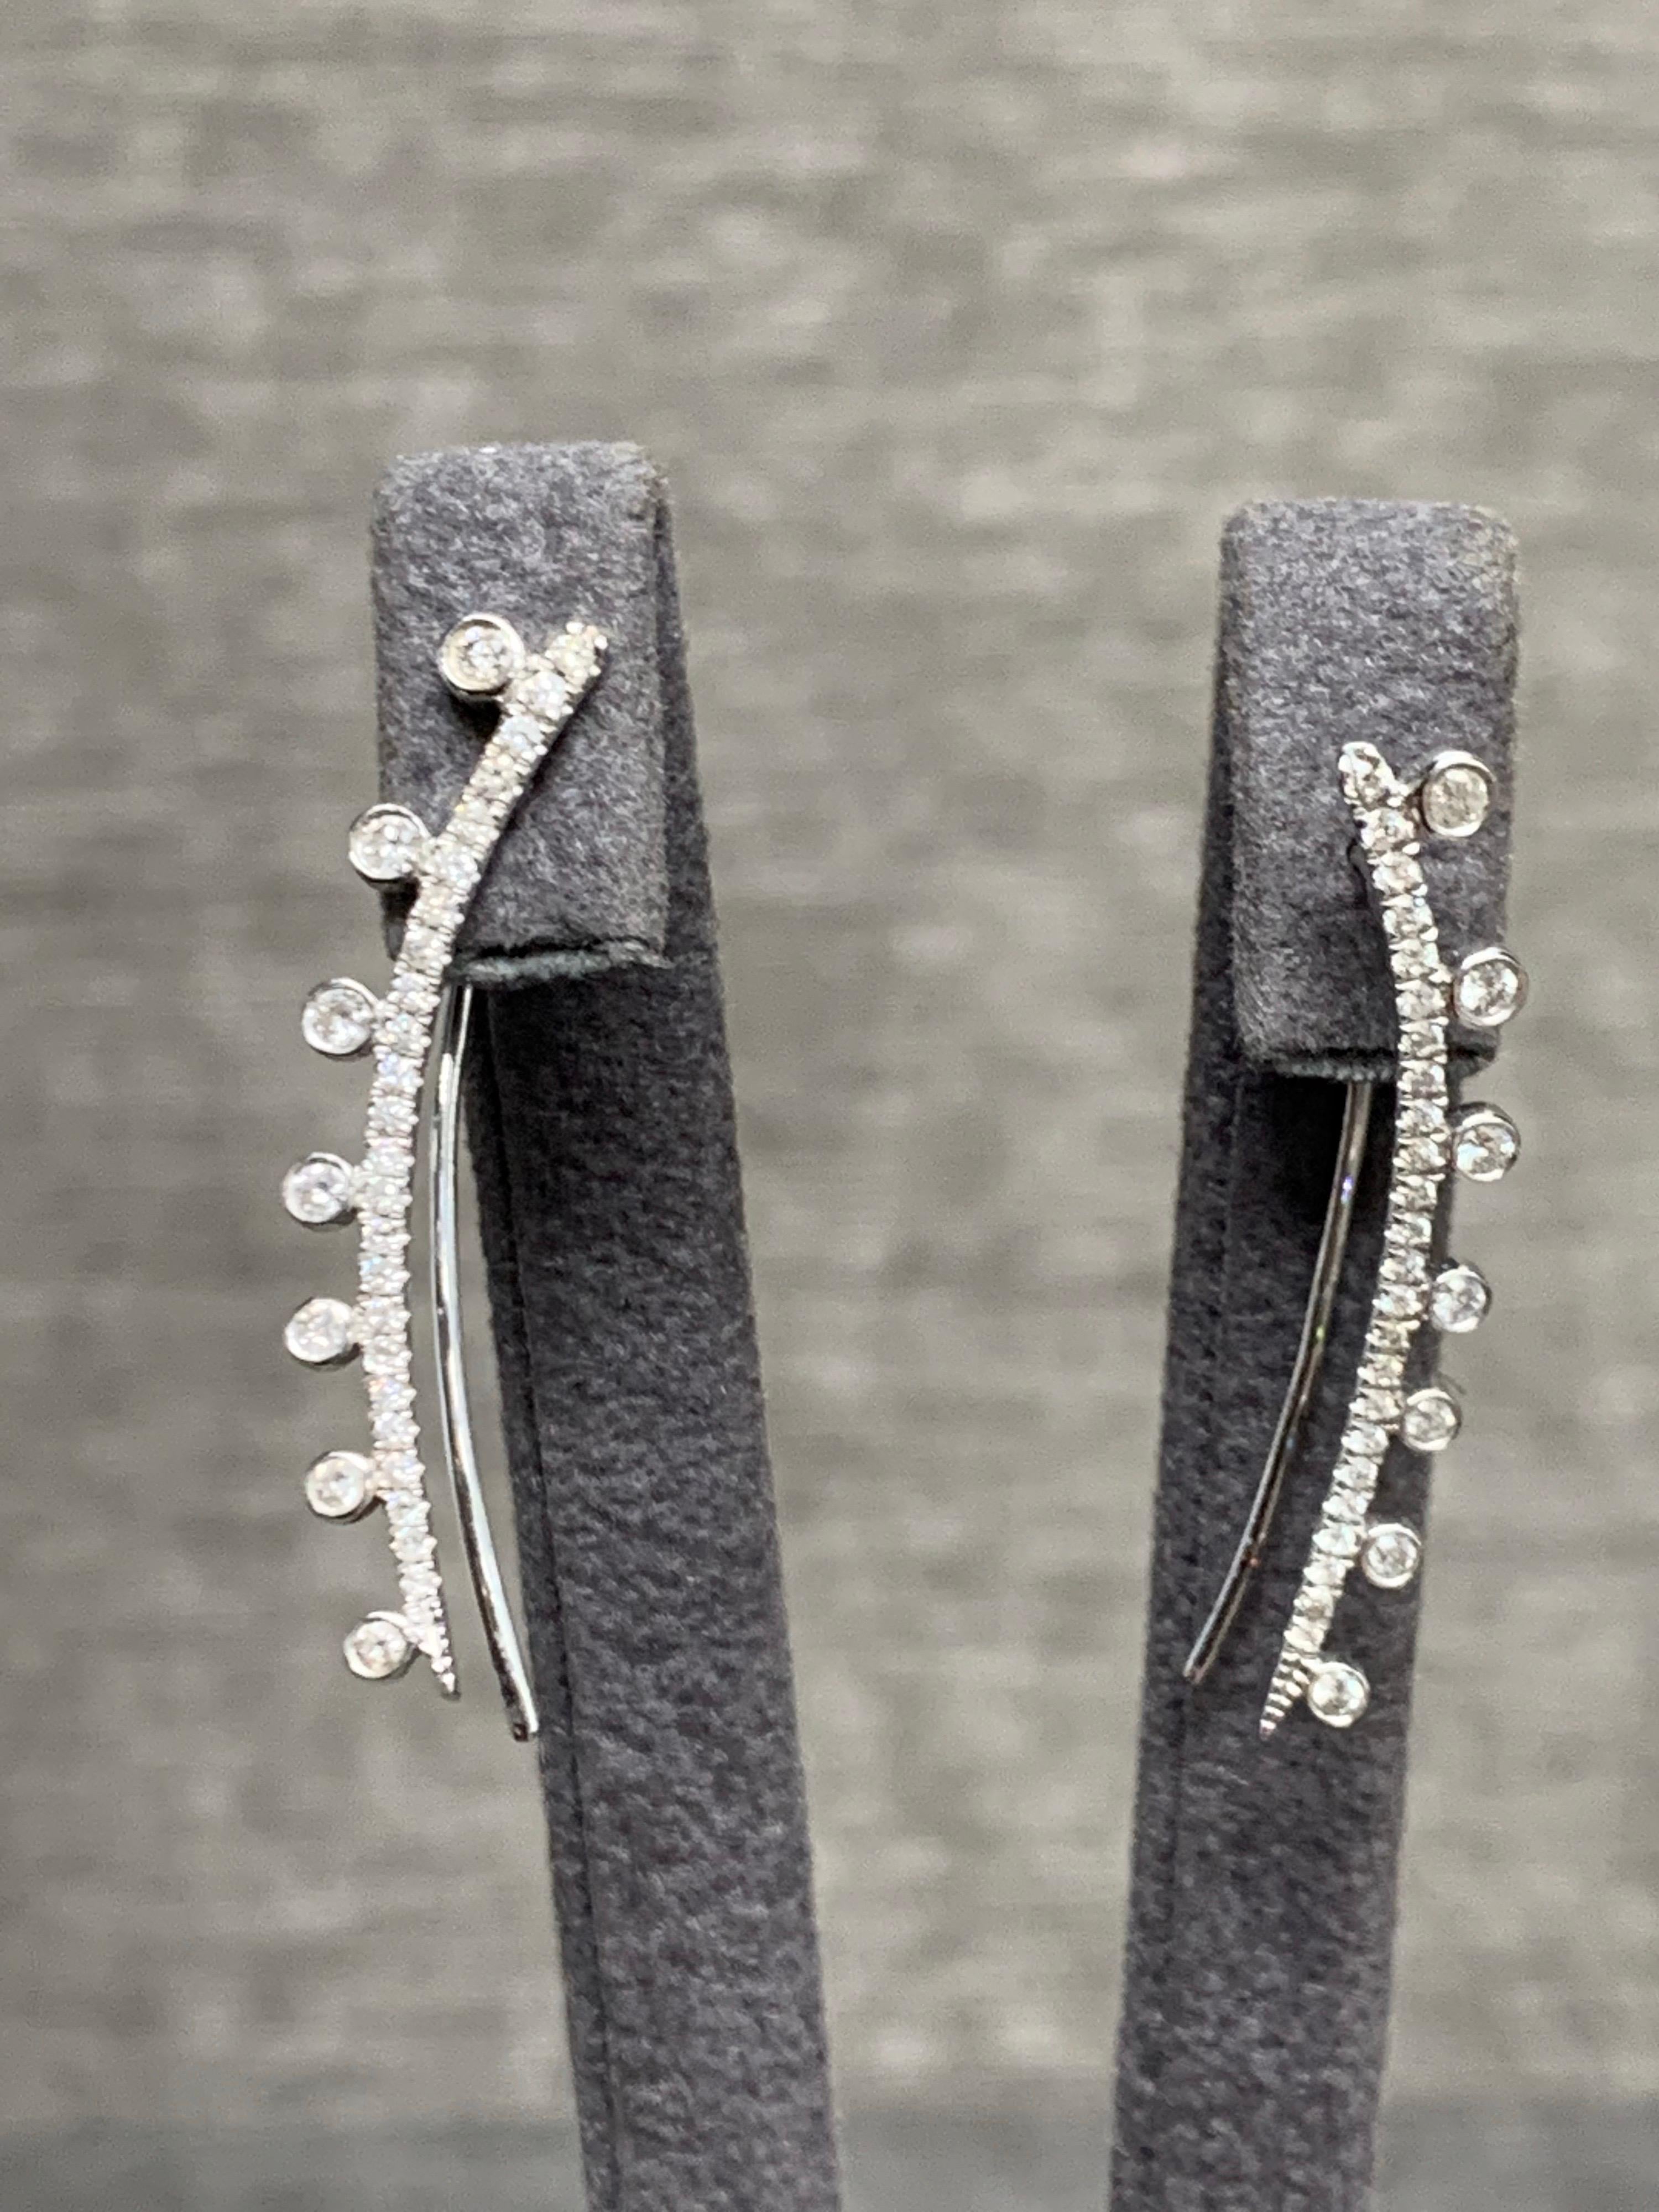 White Diamond, White Gold Earrings.

Featuring a pair of White Diamond Earrings with a total weight of 0.50 carats, set in 18K White Gold. 

This one-of-a-kind pair of earrings was created by hand is certified, appraisal included, 100% insured.